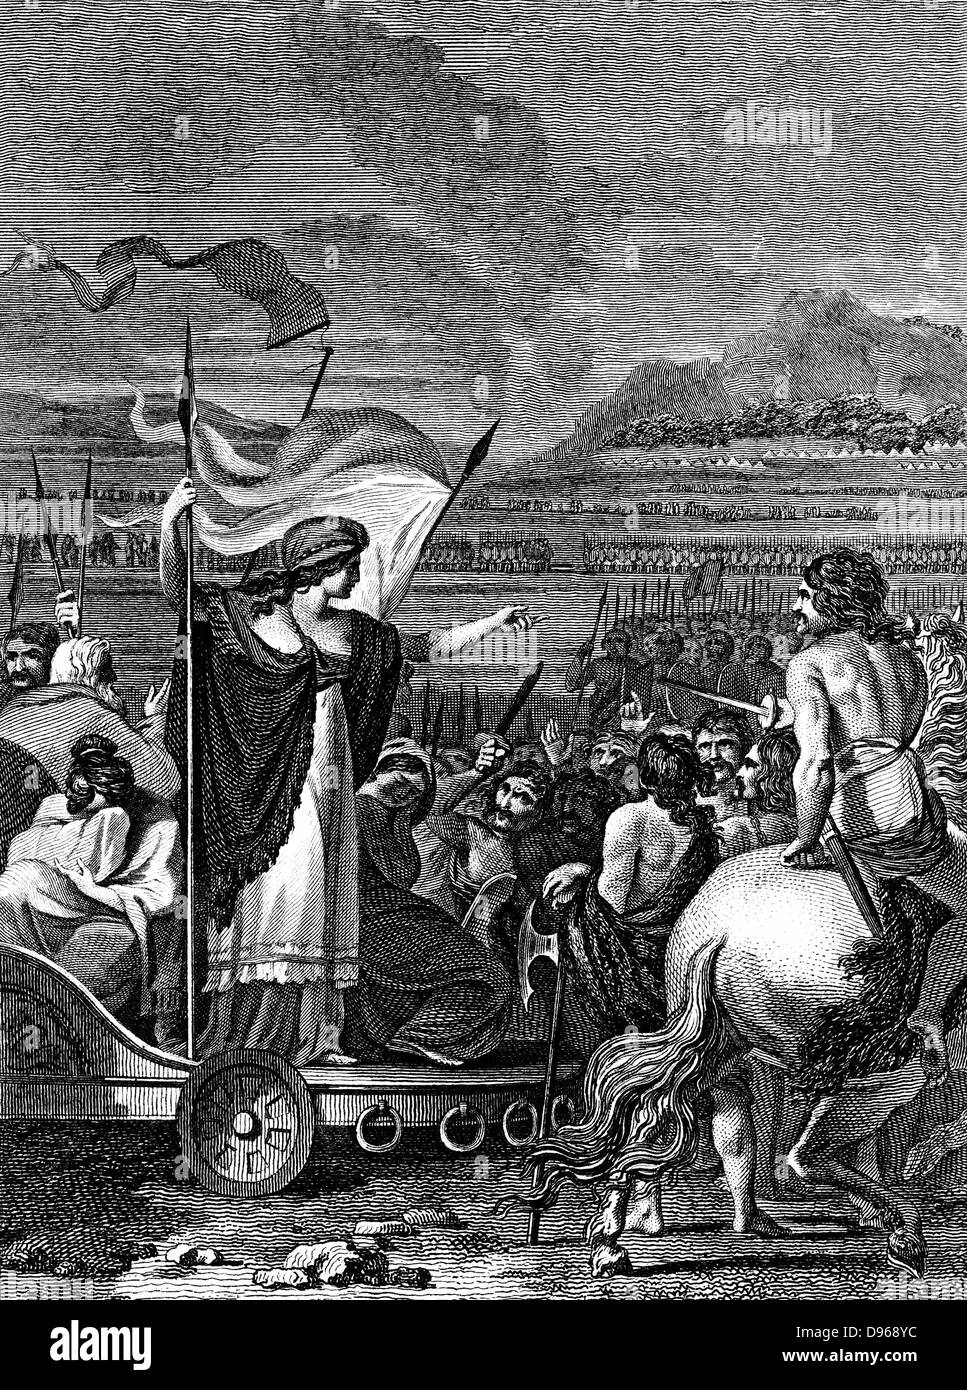 Boudicca (Boadicea) lst century British queen of Iceni, standing in her chariot with her weeping, dishonoured daughters raped by the Romans, haranguing her troops. Finally overwhelmed by Romans, Boudicca is said to have taken poison. Copperplate engraving 1824 Stock Photo